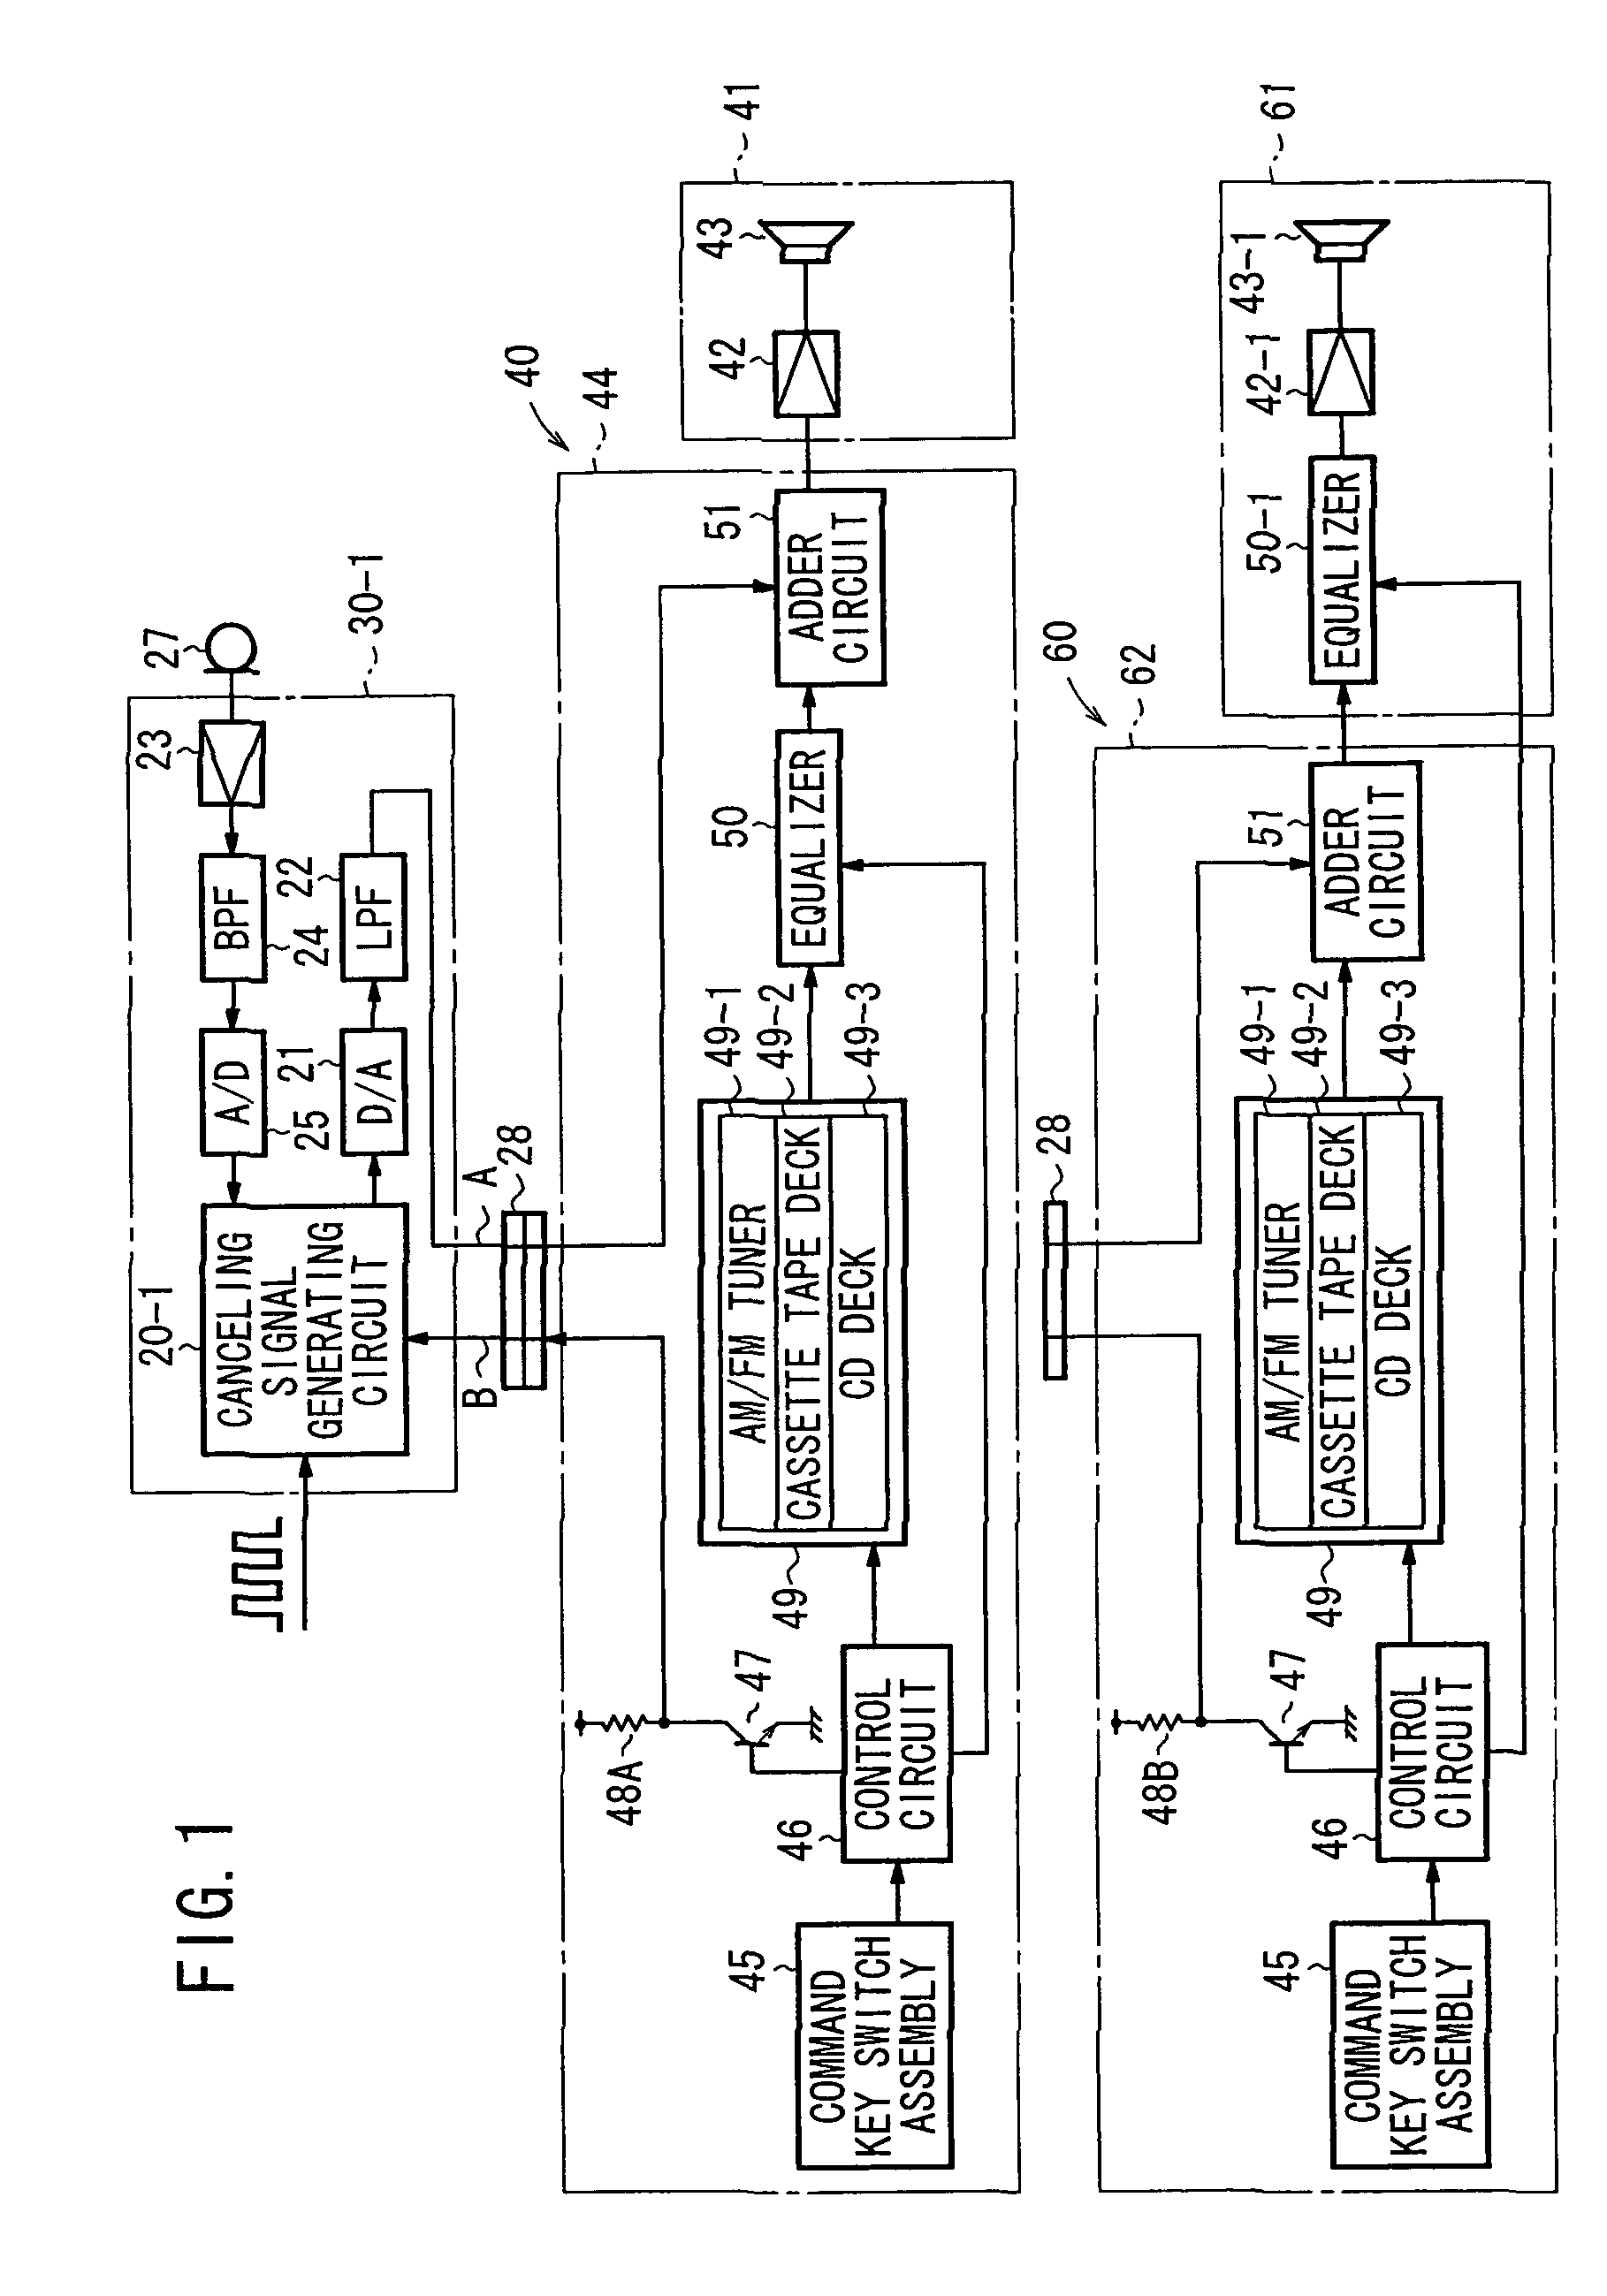 Active vibratory noise control apparatus matching characteristics of audio devices